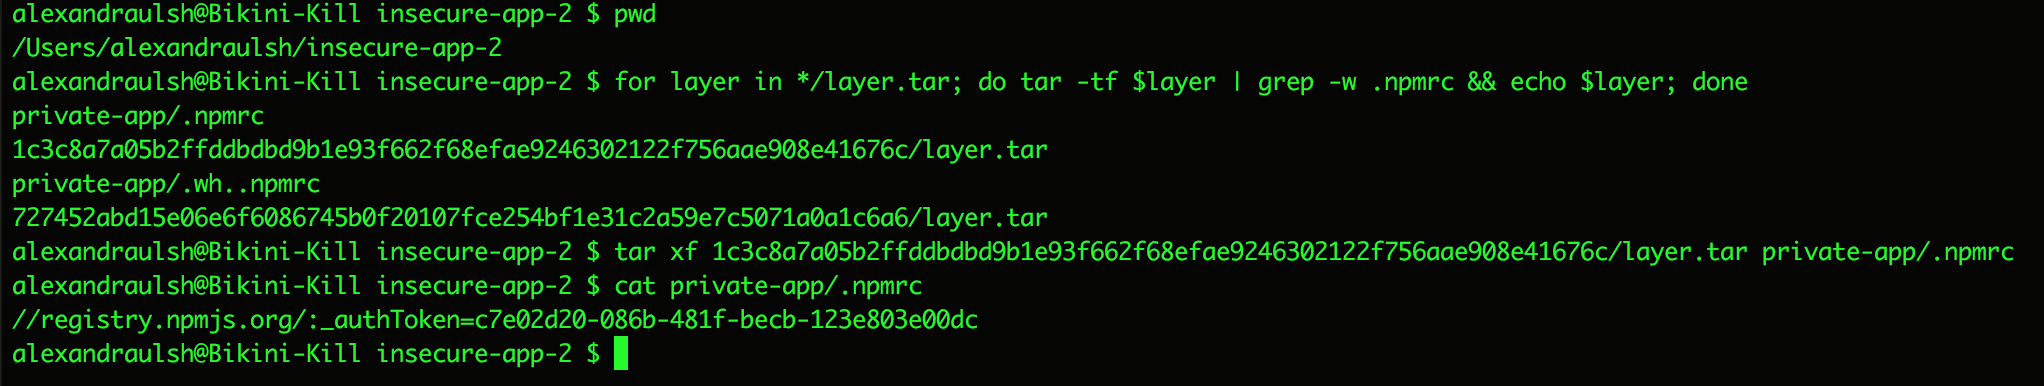 Stealing .npmrc files from Docker layers